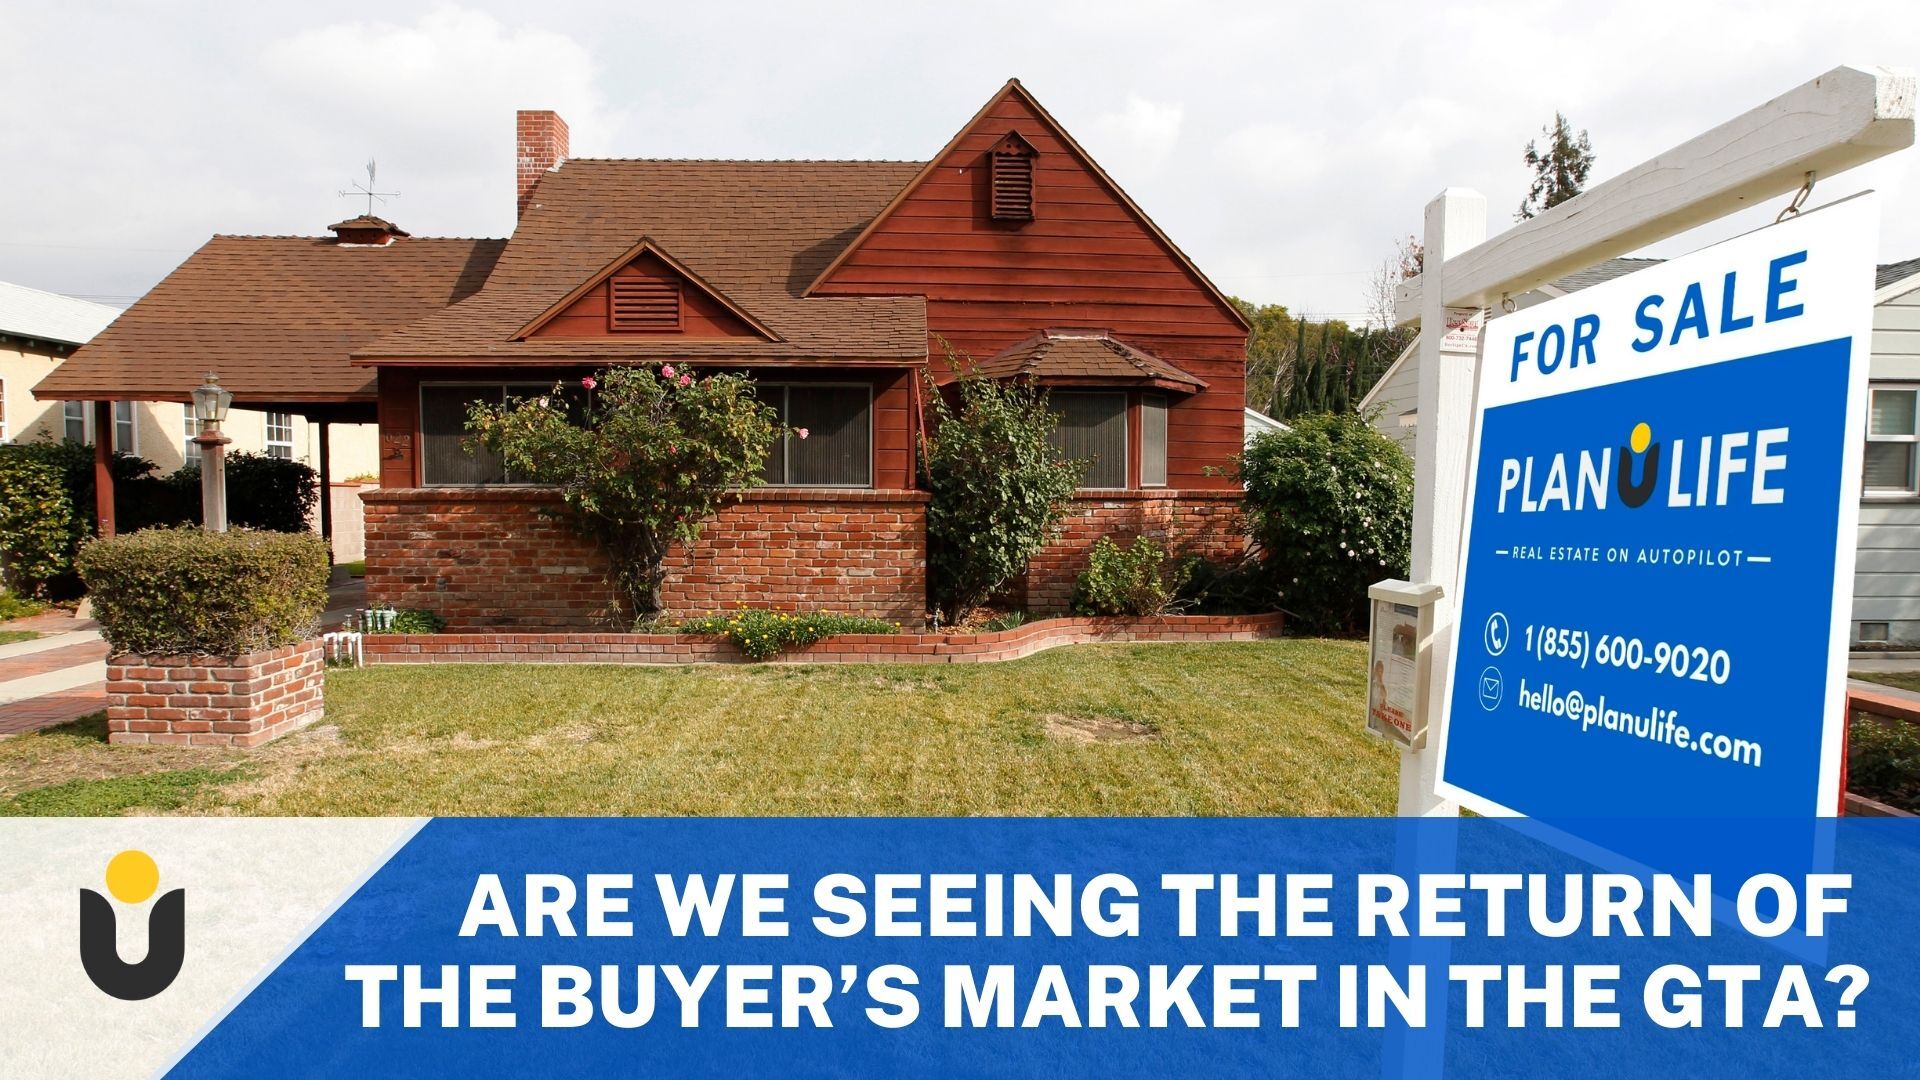 Are we seeing the return of the Buyers’ Market in the GTA?